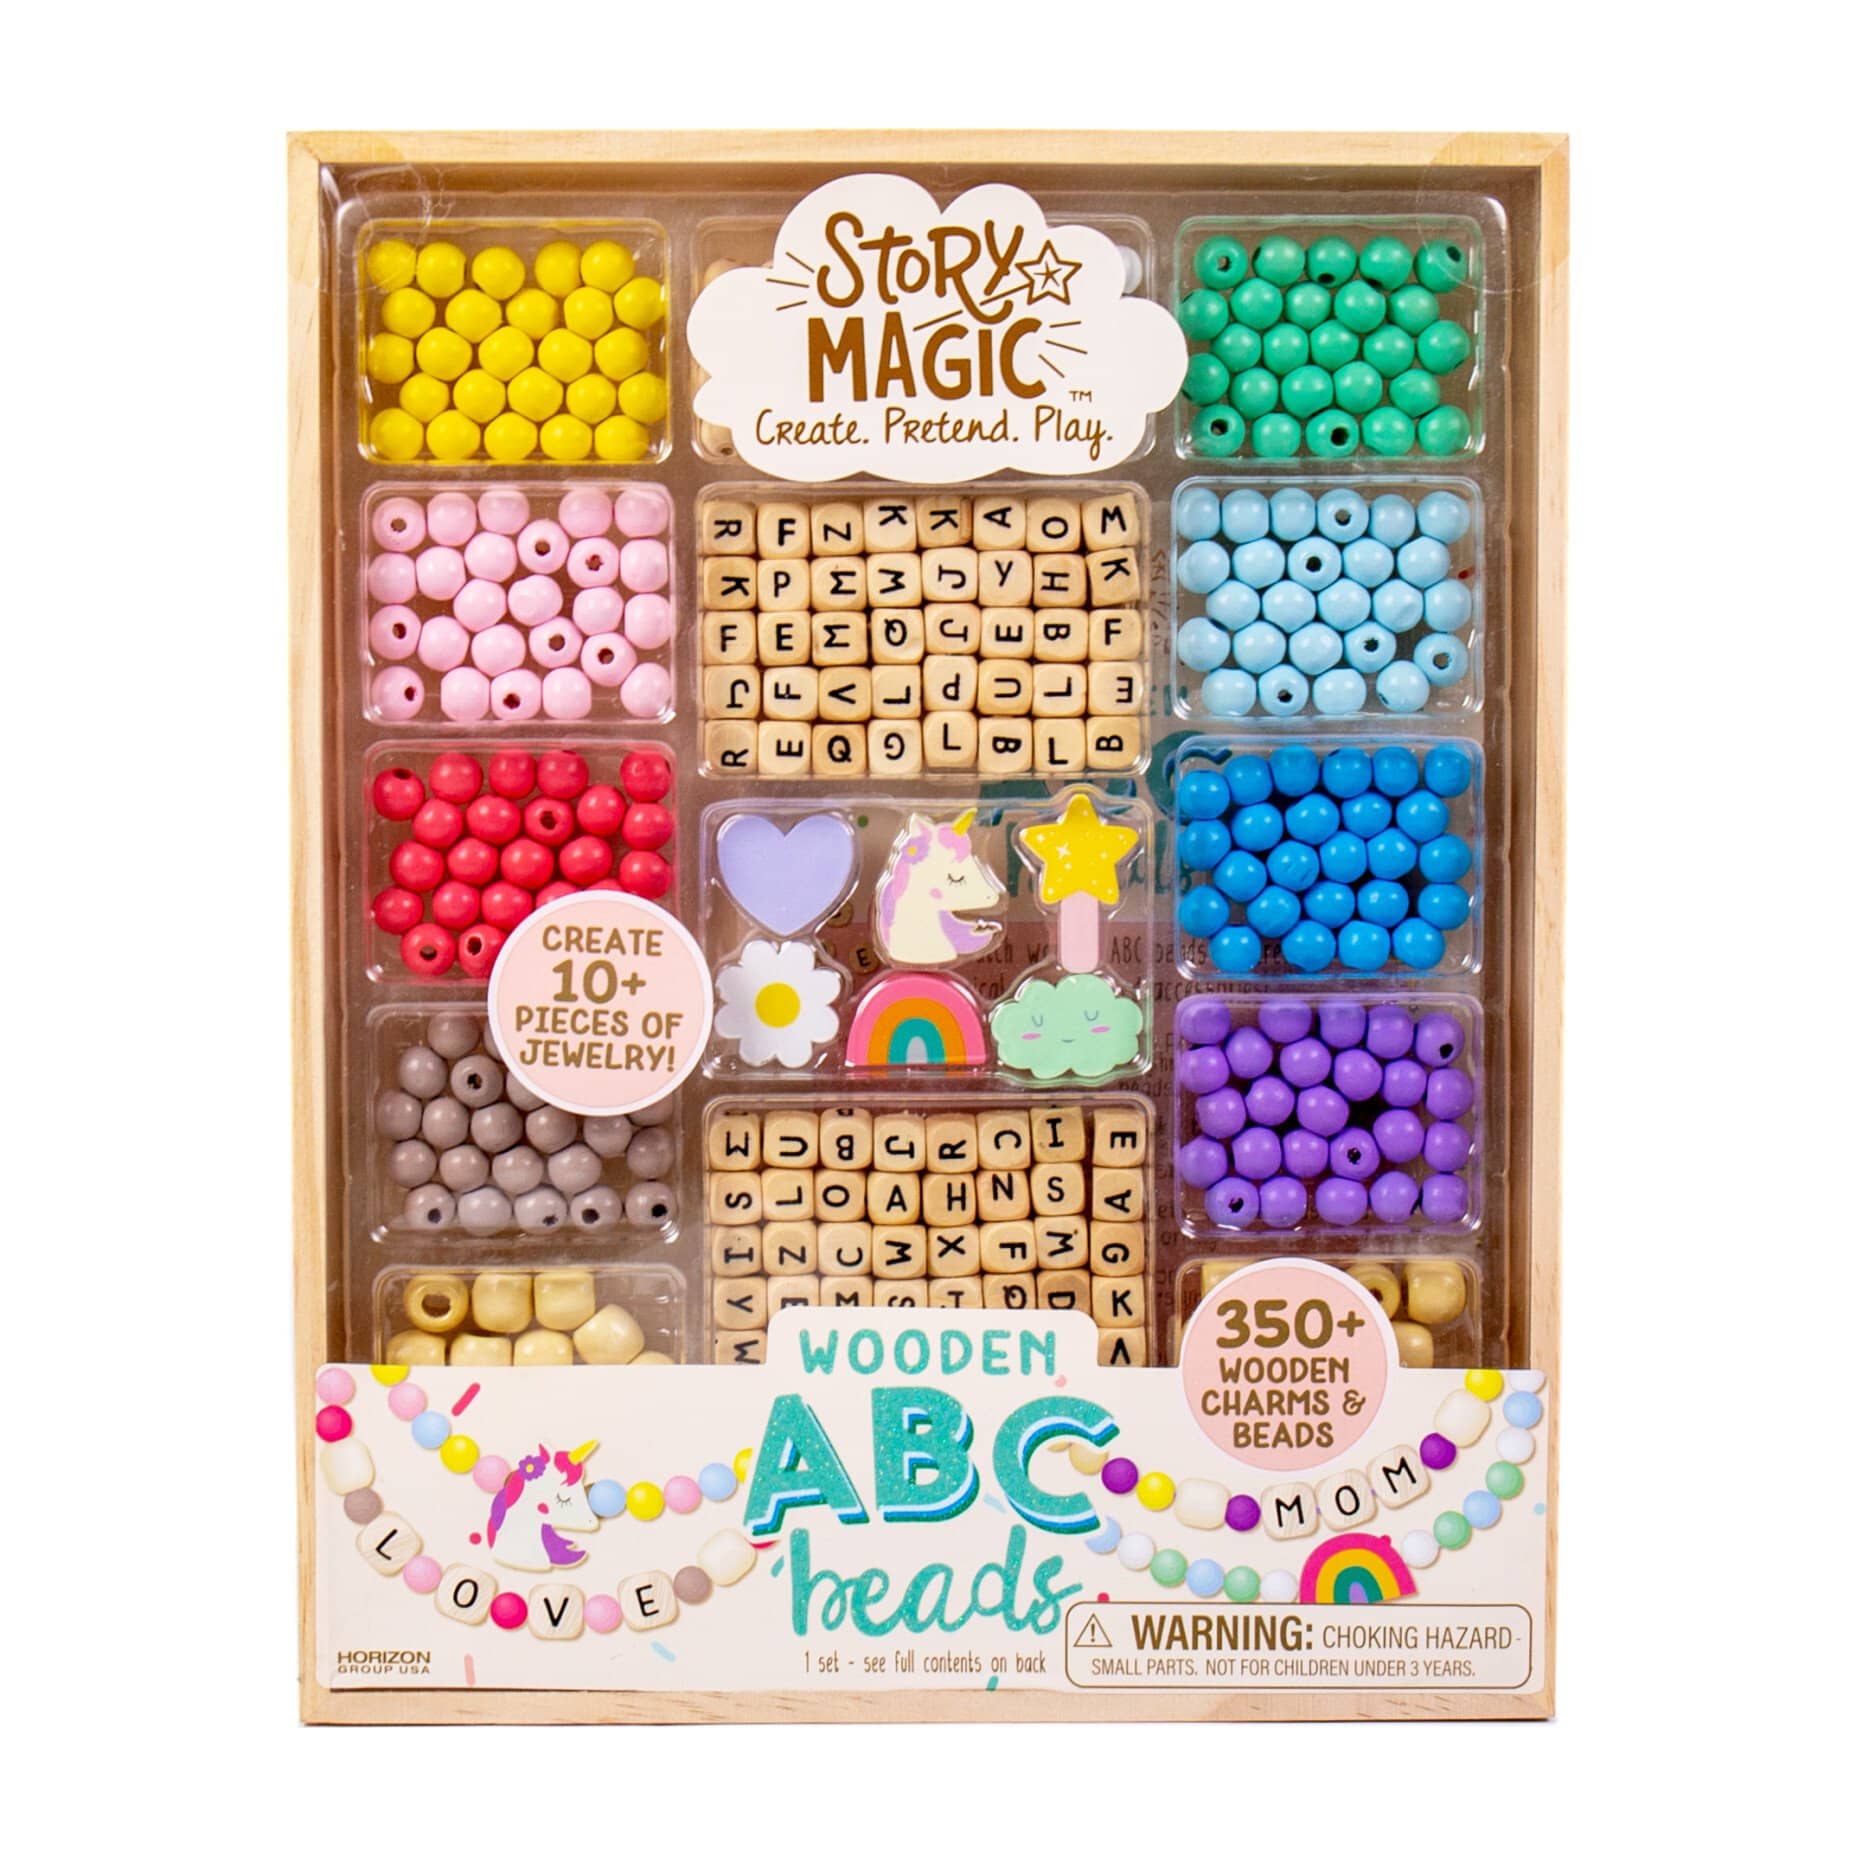 Wooden Abc Beads Arts & Crafts